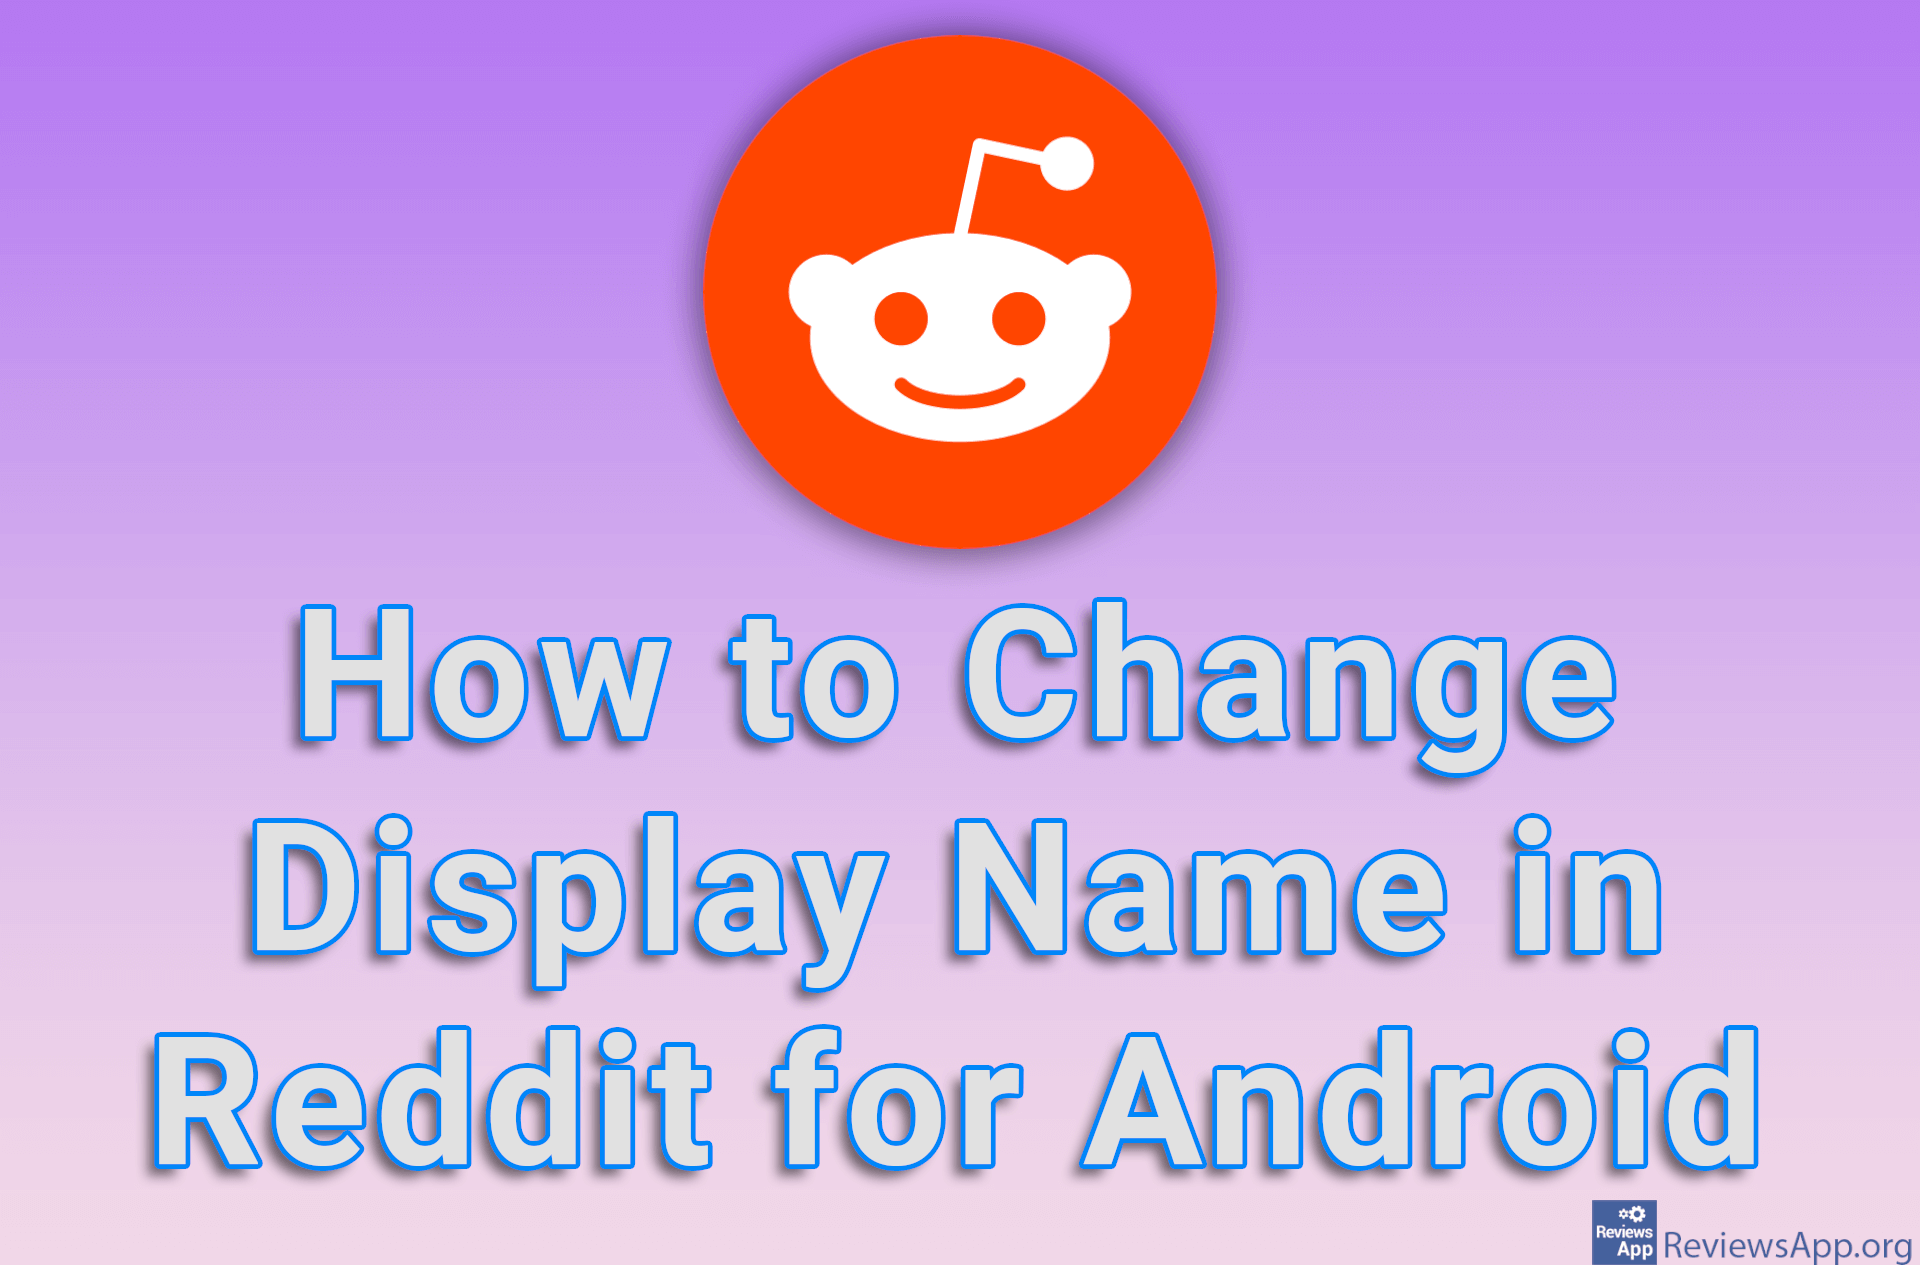 How to Change Display Name in Reddit for Android